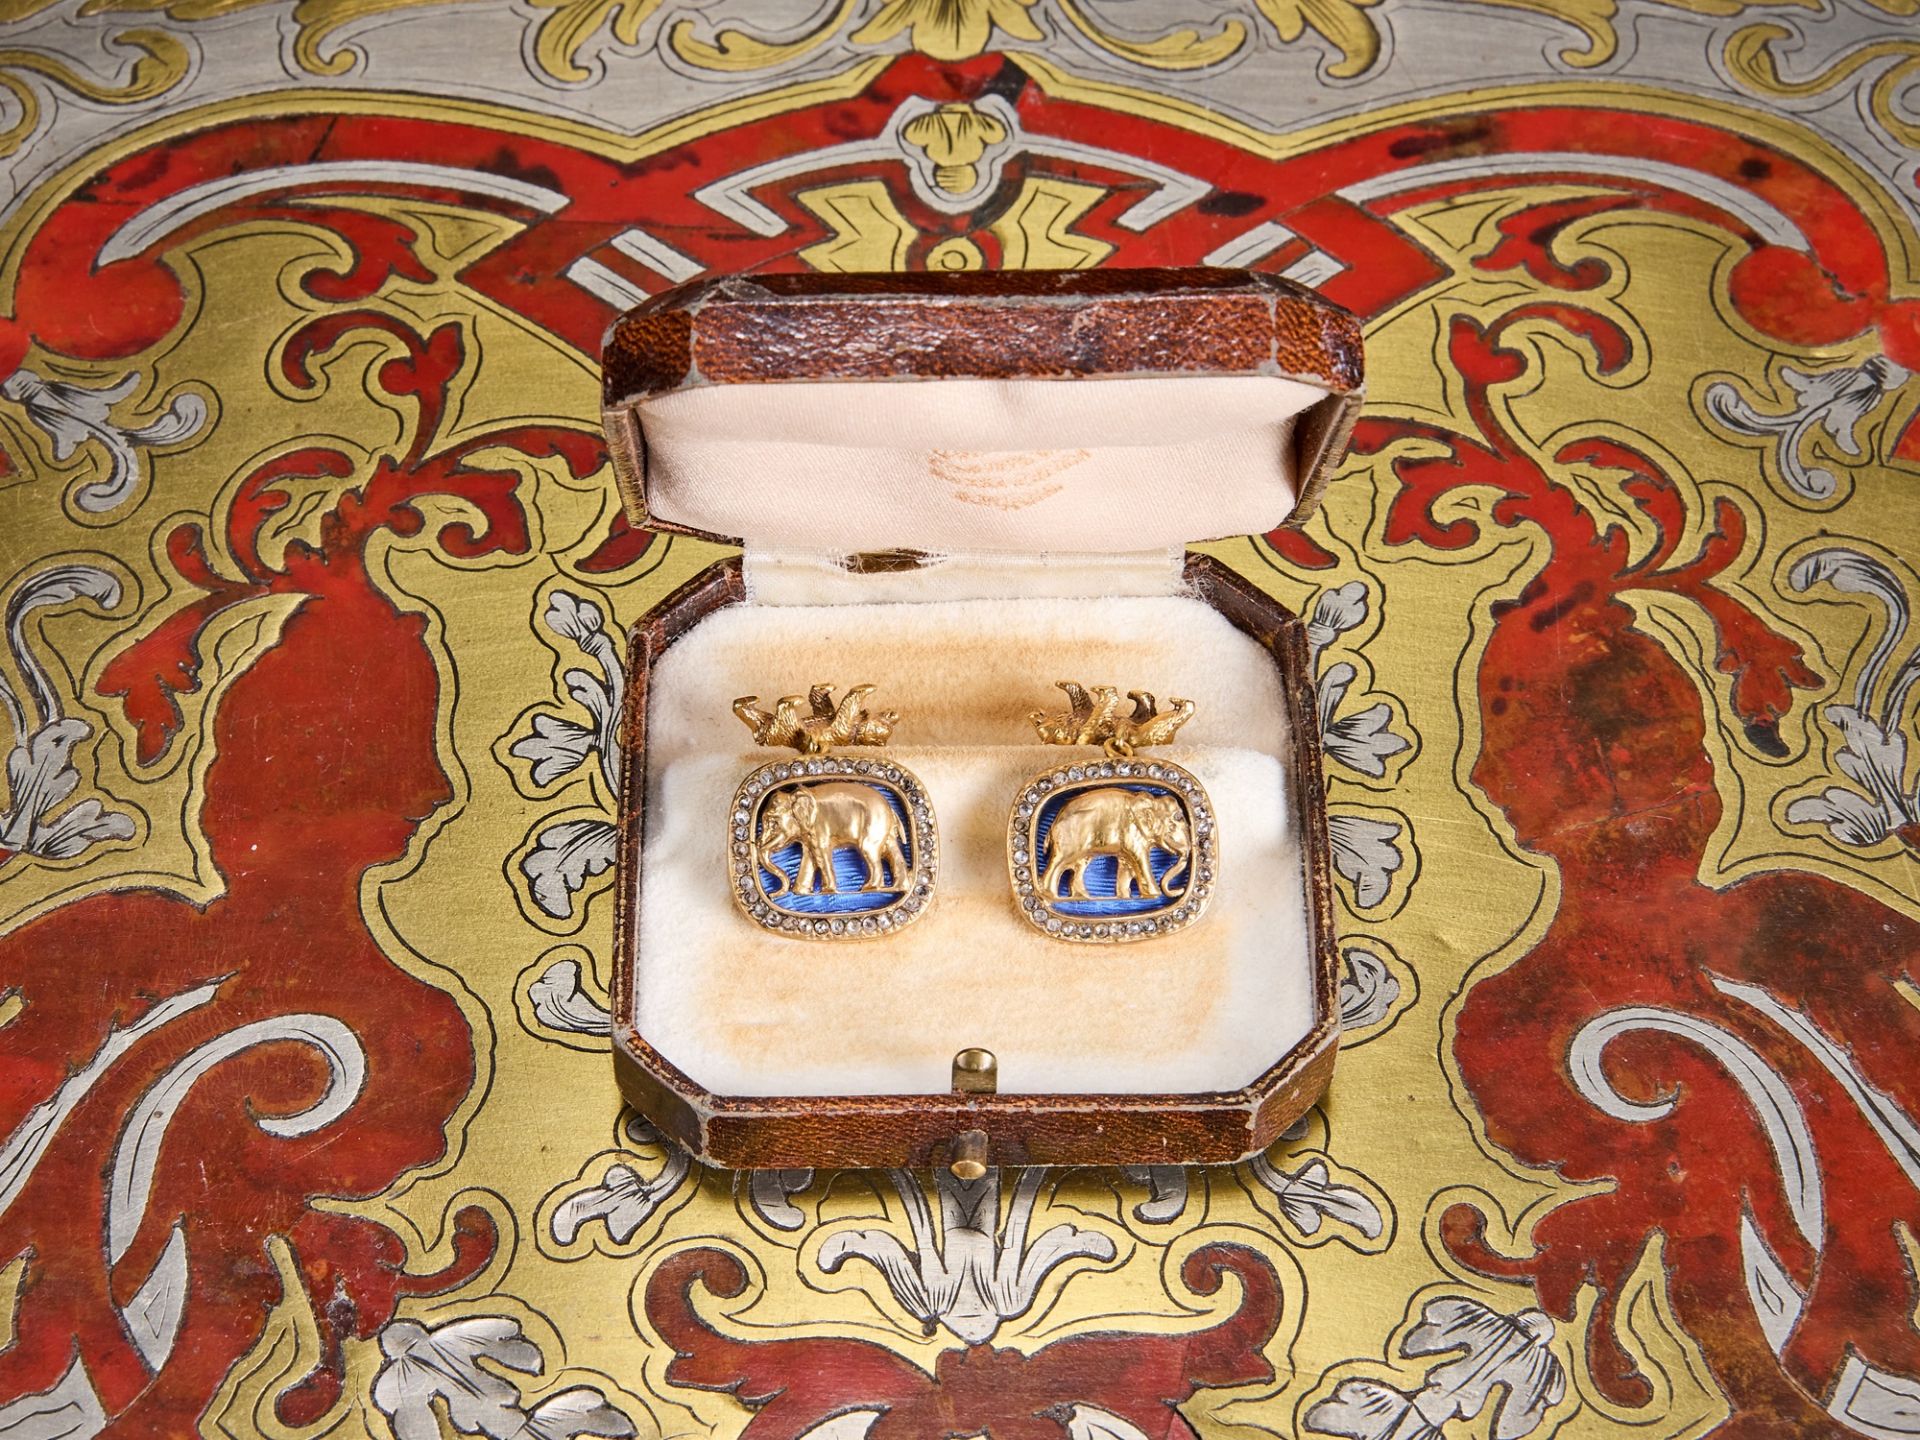 A PAIR OF FABERGE STYLE DIAMOND ENCRUSTED, SILVER GILT AND ENAMELLED CUFFLINKS